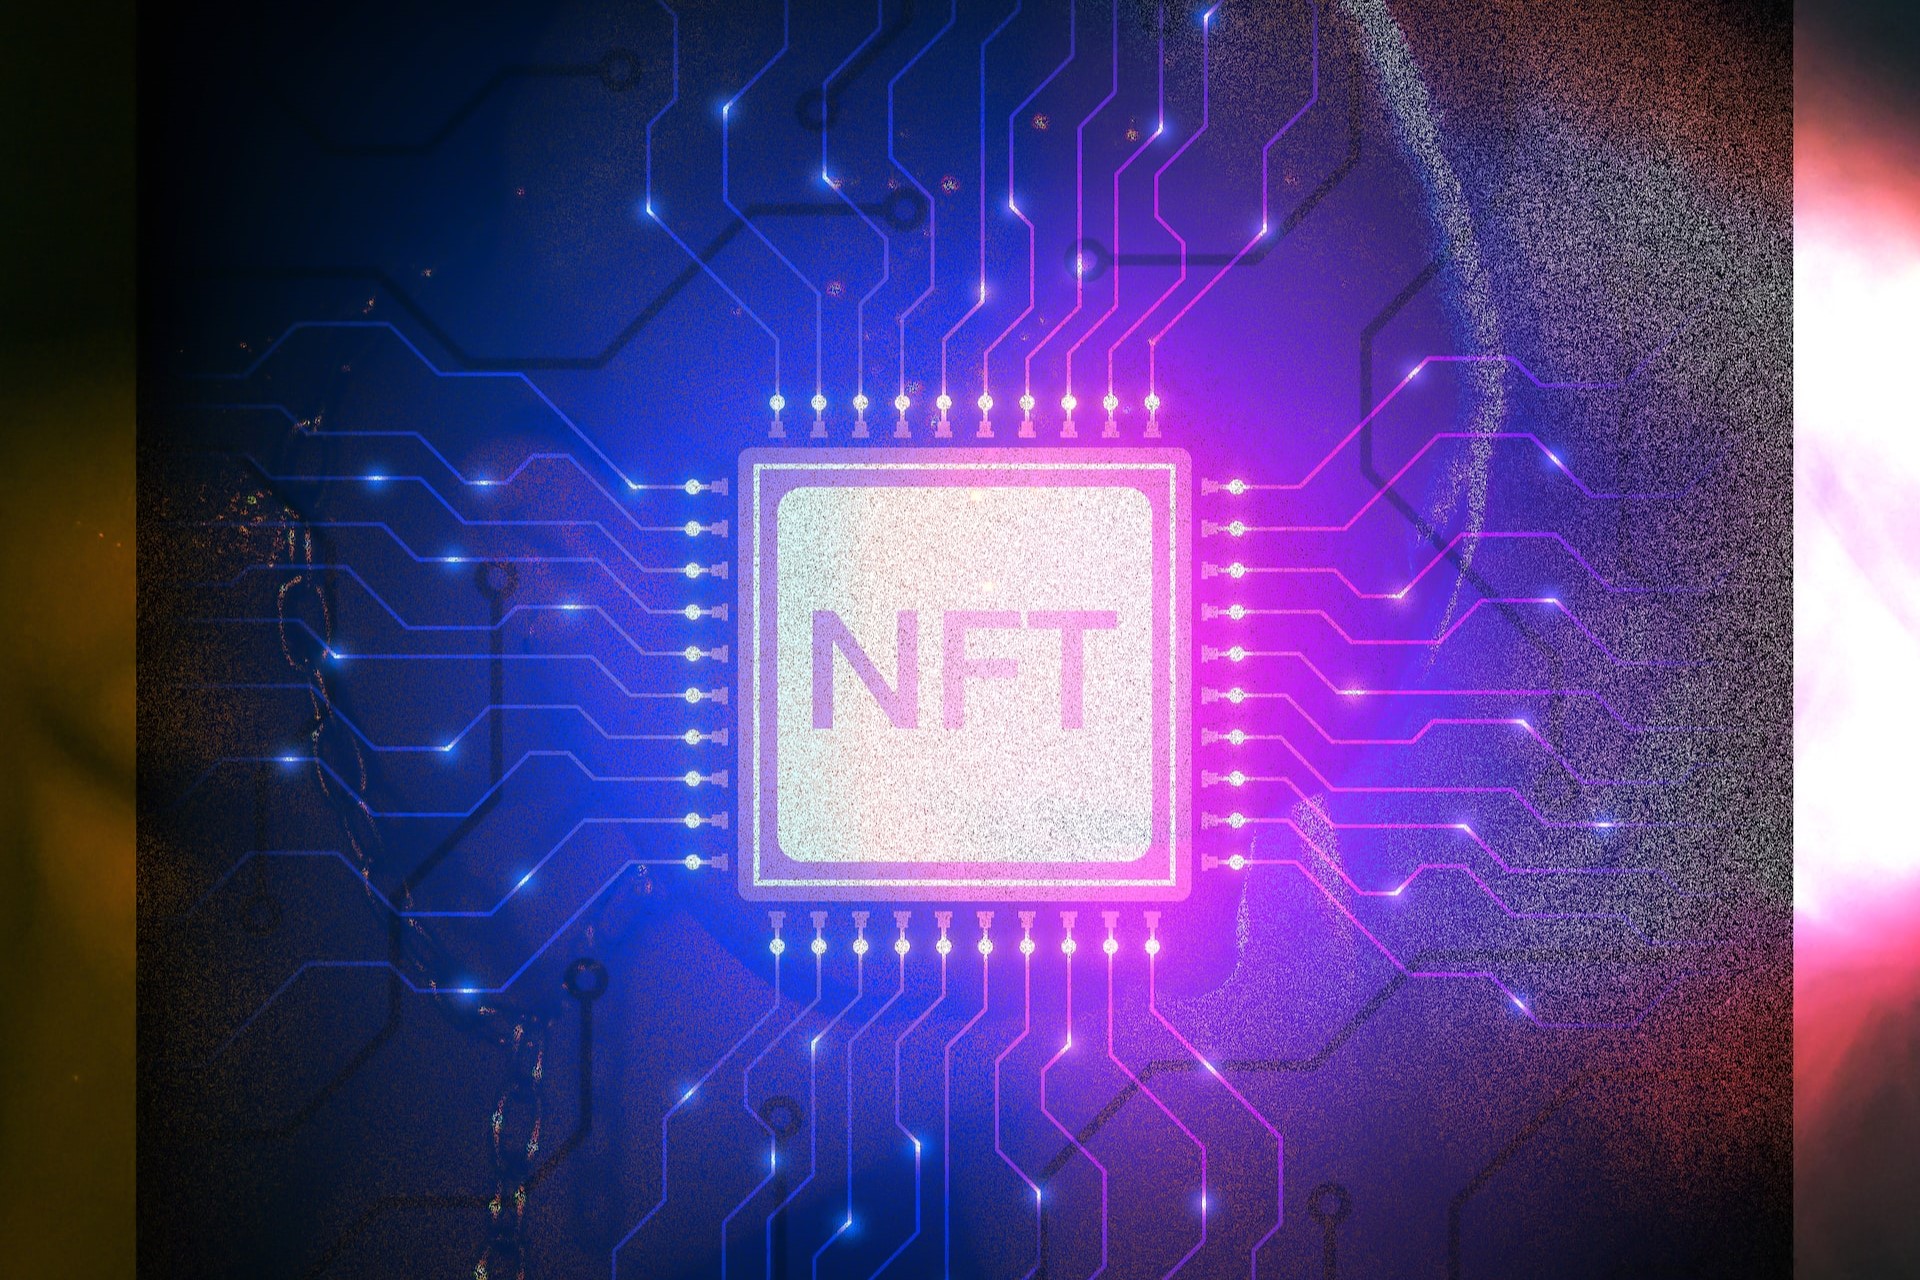 NFTs and NTF use cases explained - Definition, Meaning and beyond the hype